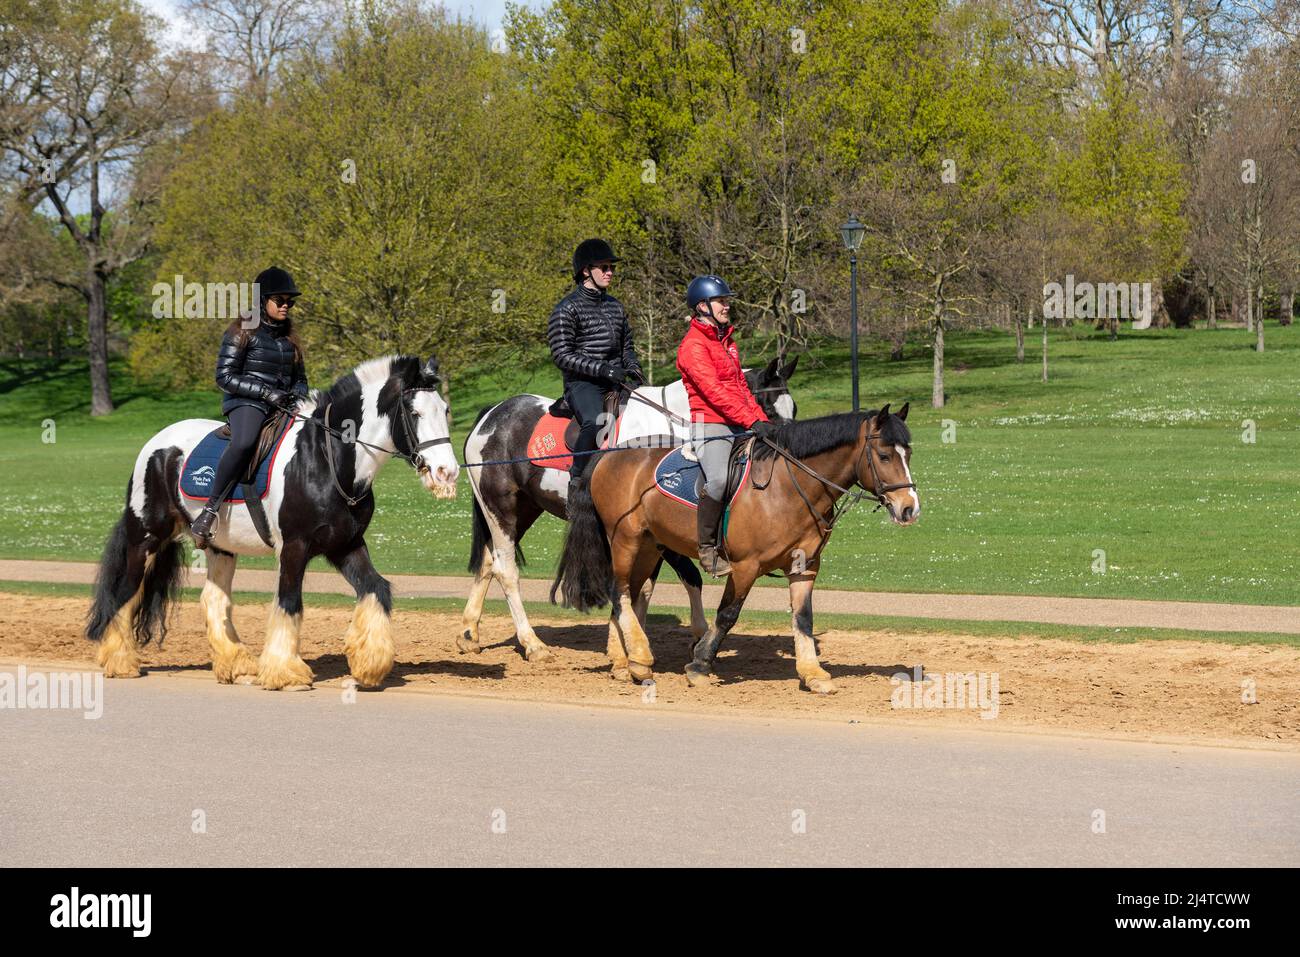 Horse riding school in London park on a bright sunny Spring day. Escorted horse riders on bridleway Stock Photo